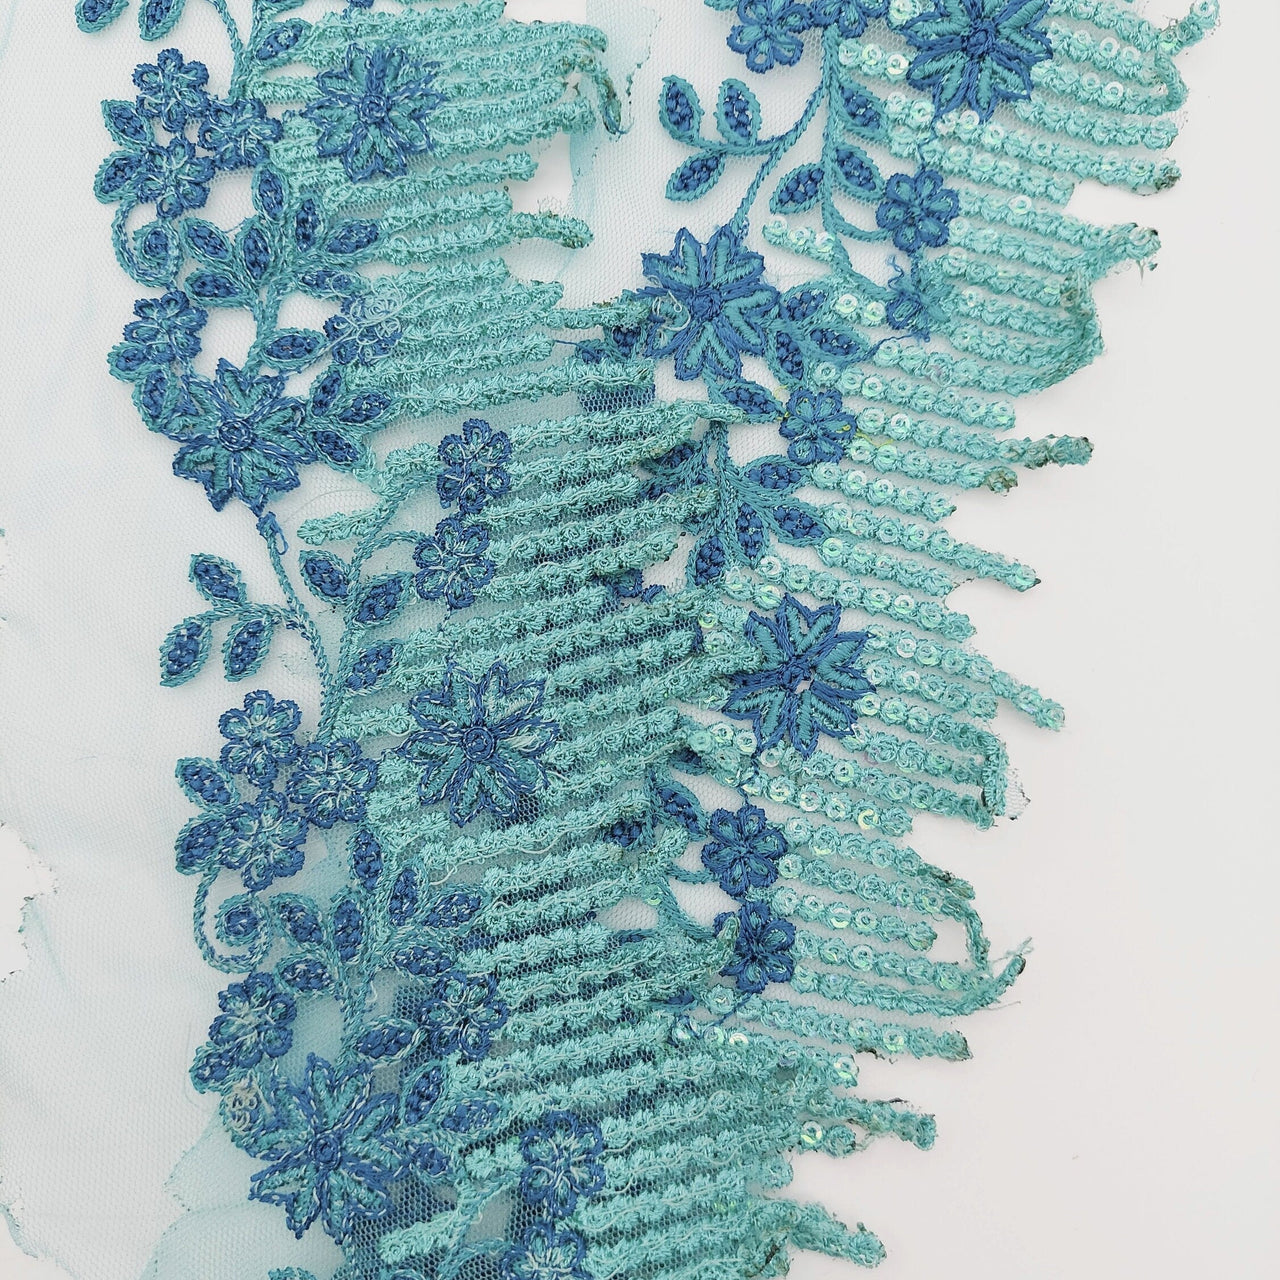 Cyan Blue Net Scallop Lace Trim with Navy Blue Floral Embroidery And Blue Sequins, Sari Border, Embroidered Trim